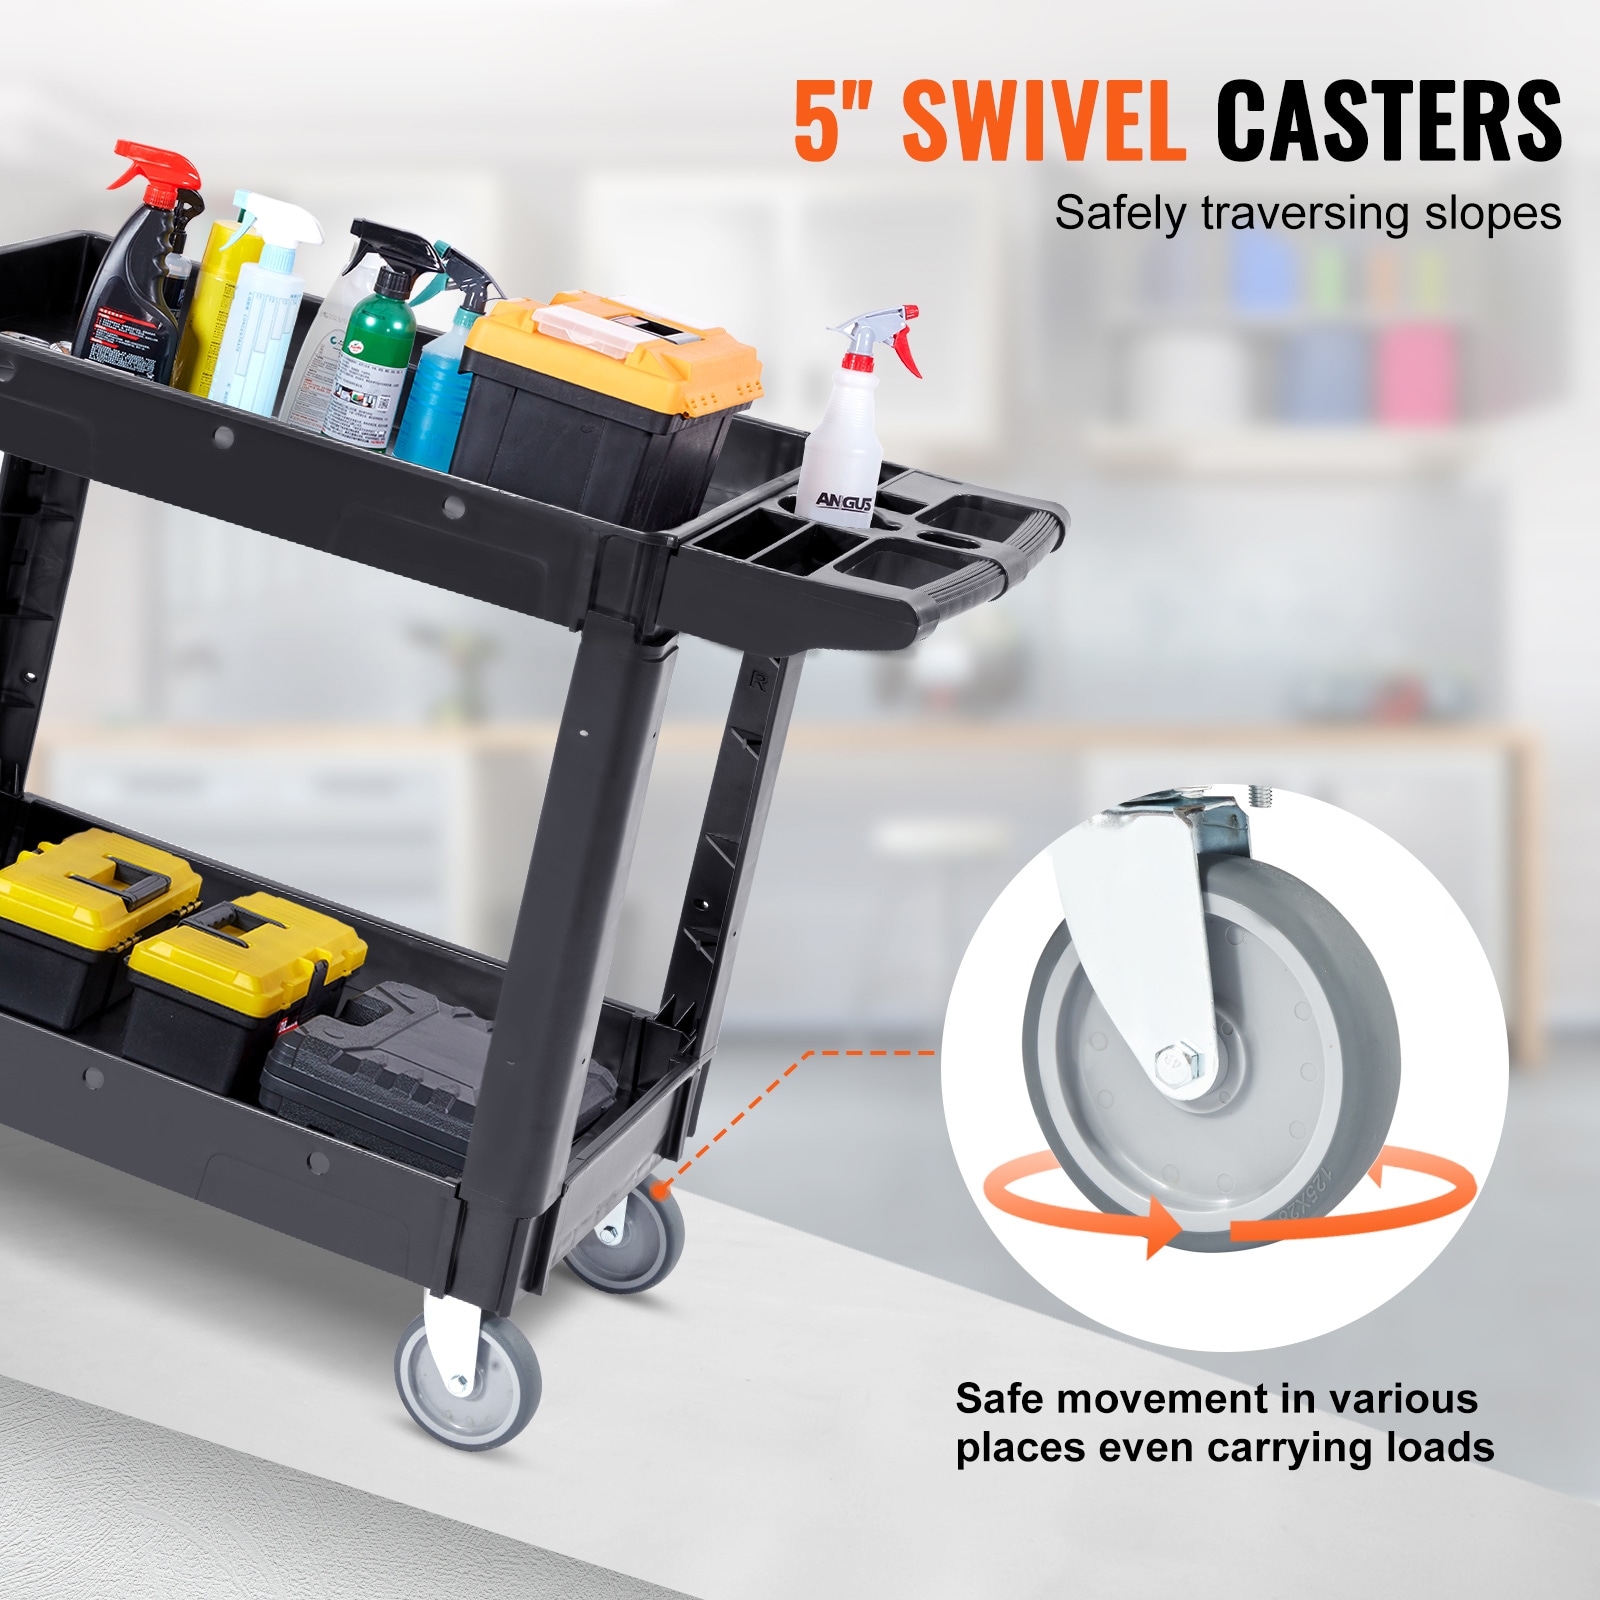 WEN 33.38-in-Drawer Shelf Utility Cart in the Utility Carts department at